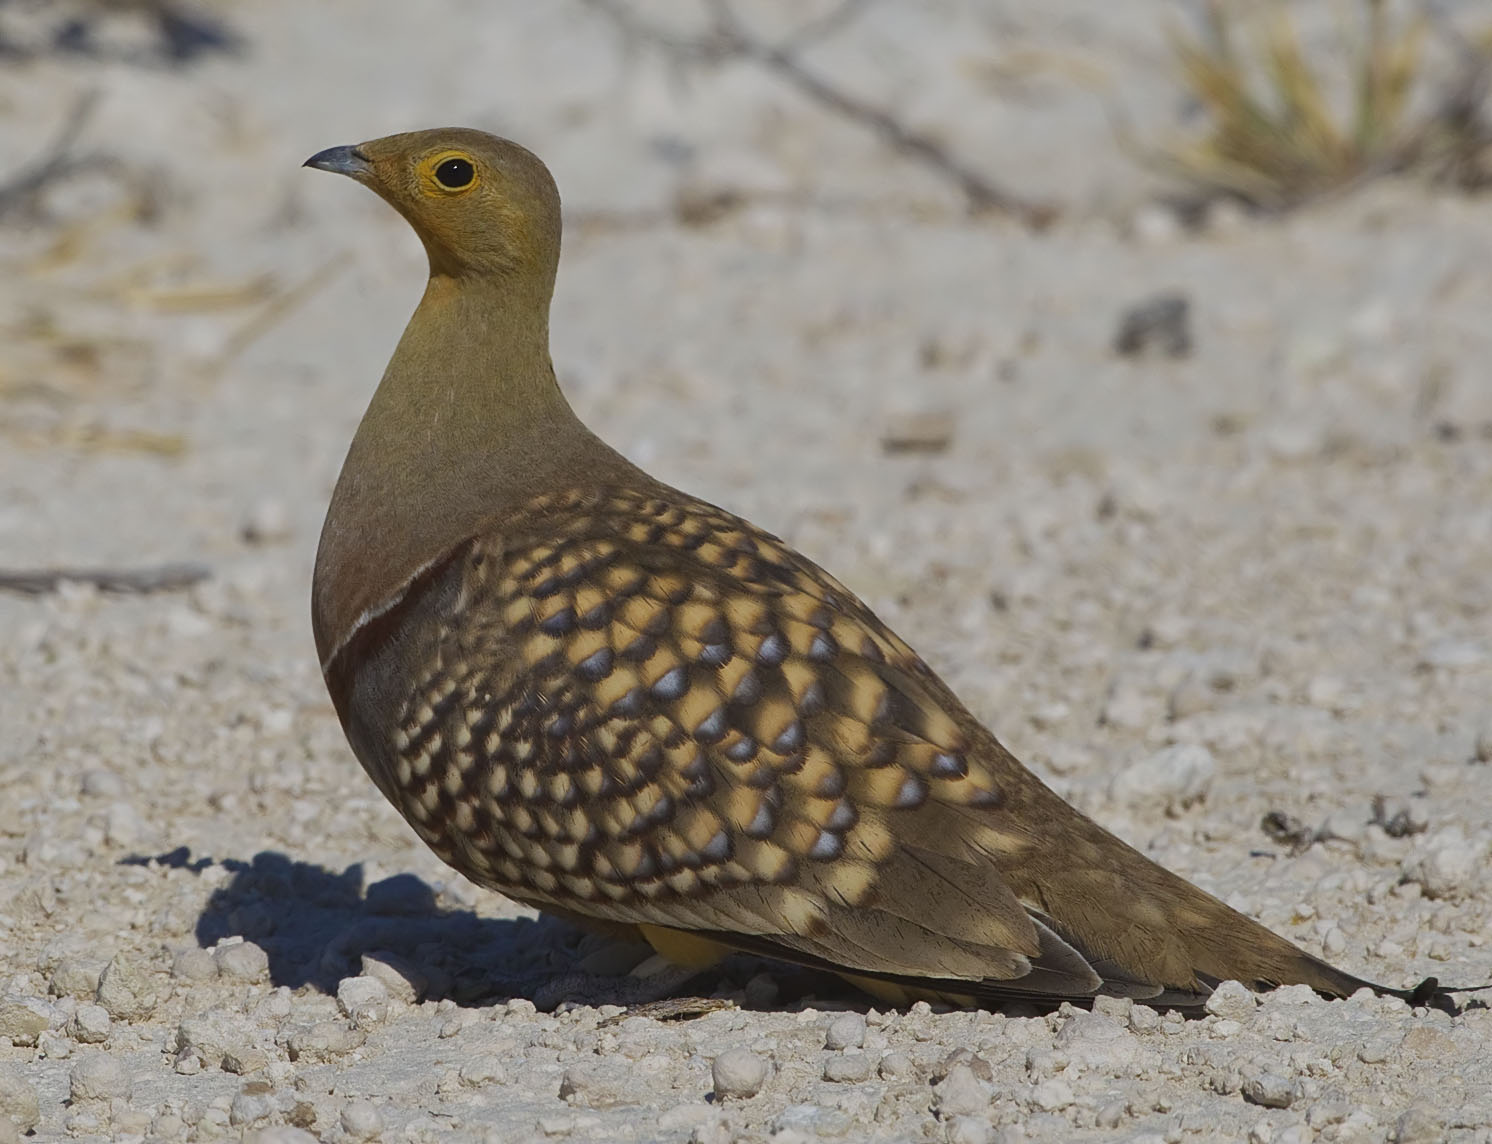 Initiative to release 150 birds postponed due to over-hunting in Qatar mainland